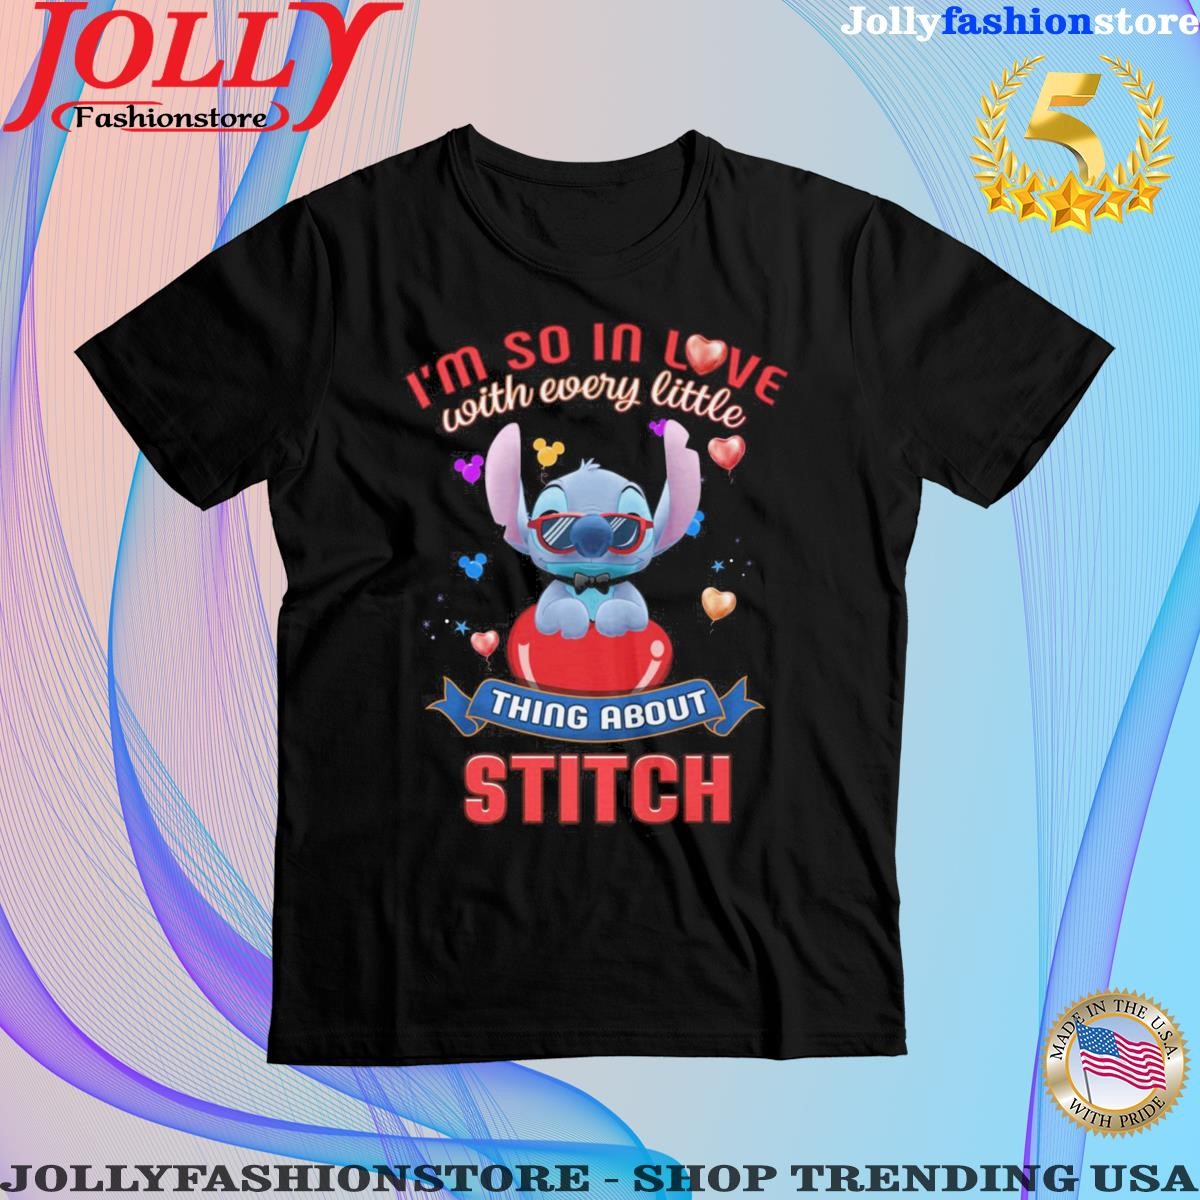 Stitch I'm so in love with every little thing about stitch Shirt